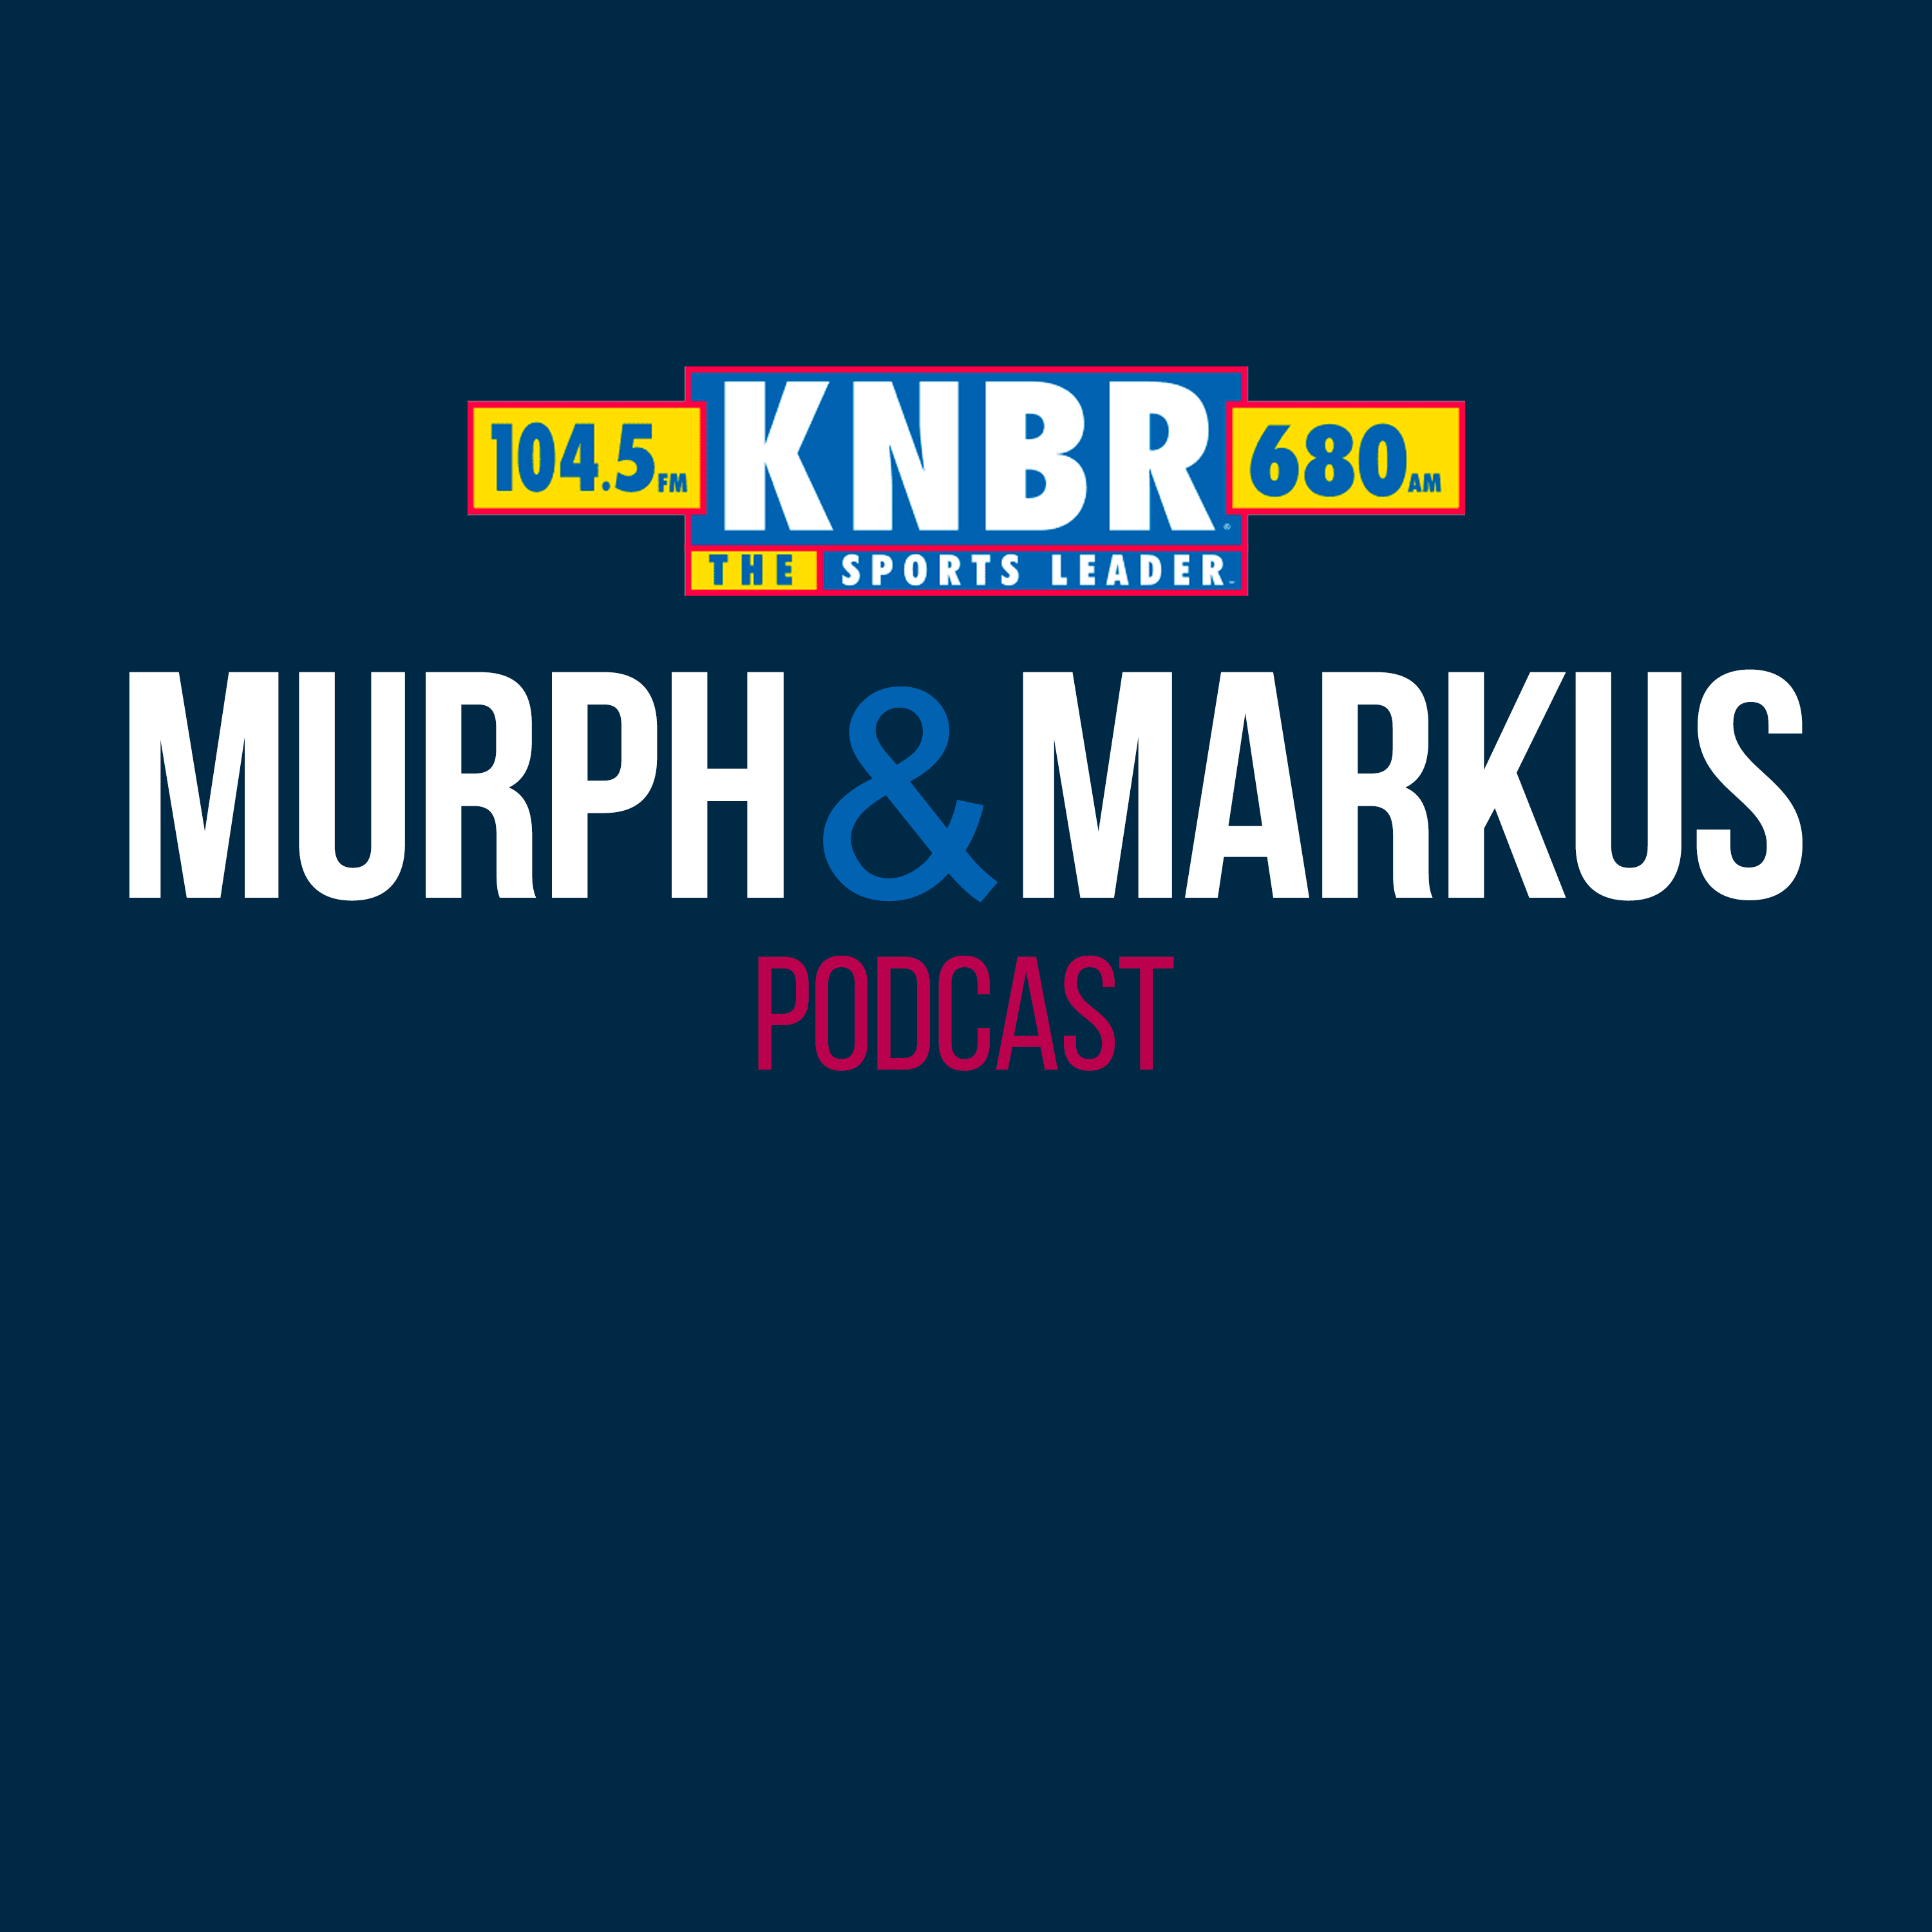 12-5 Trent Williams joins Murph & Markus to give his perspective on the 49ers dominant win in Philly and to discuss the backstory on the pre-game walkout